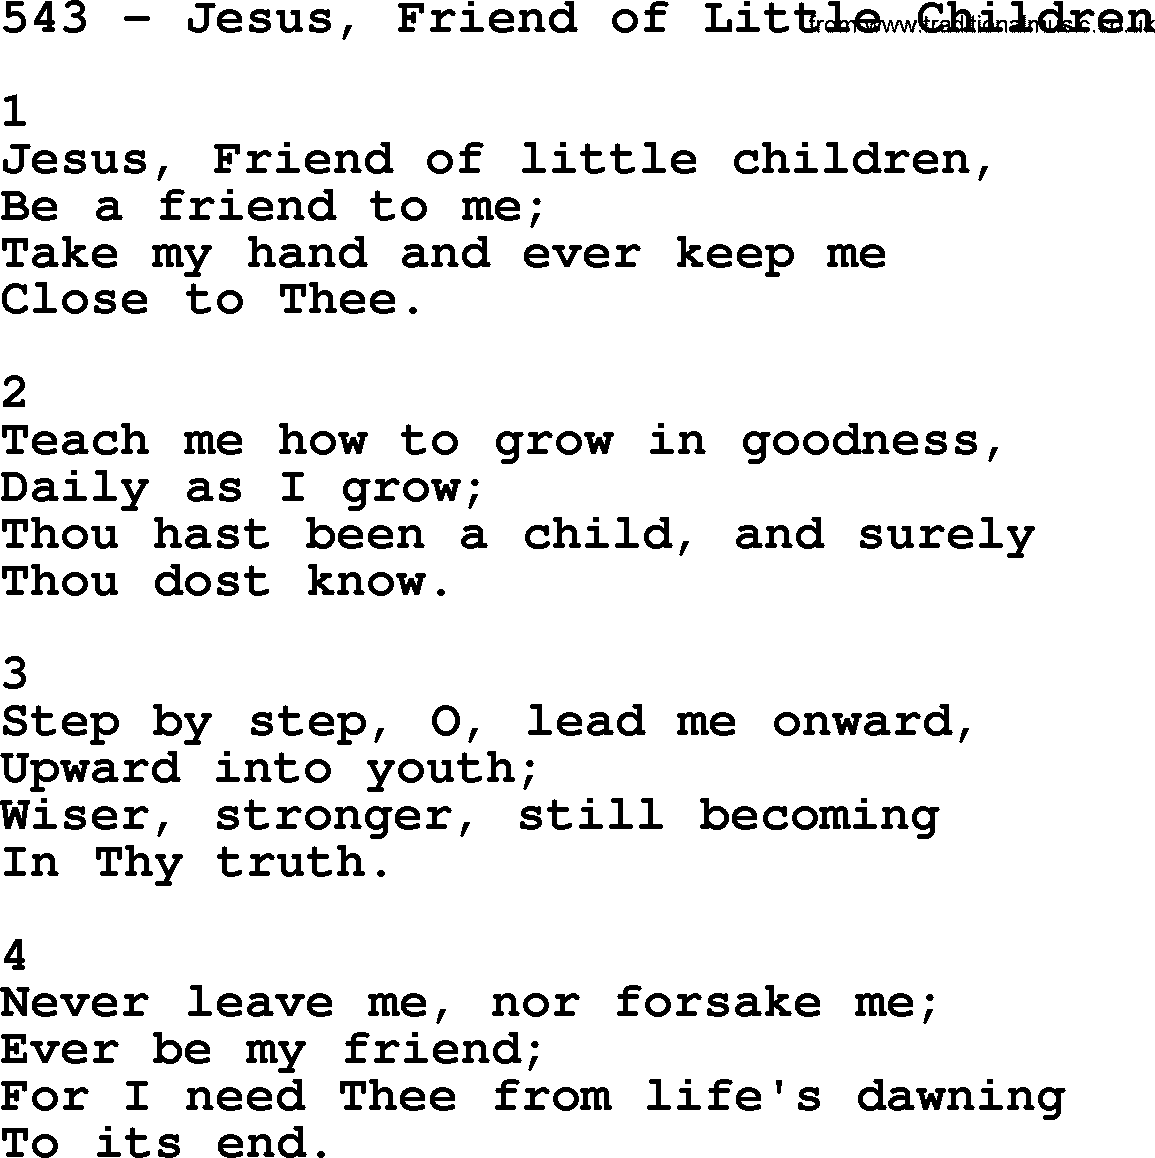 Complete Adventis Hymnal, title: 543-Jesus, Friend Of Little Children, with lyrics, midi, mp3, powerpoints(PPT) and PDF,